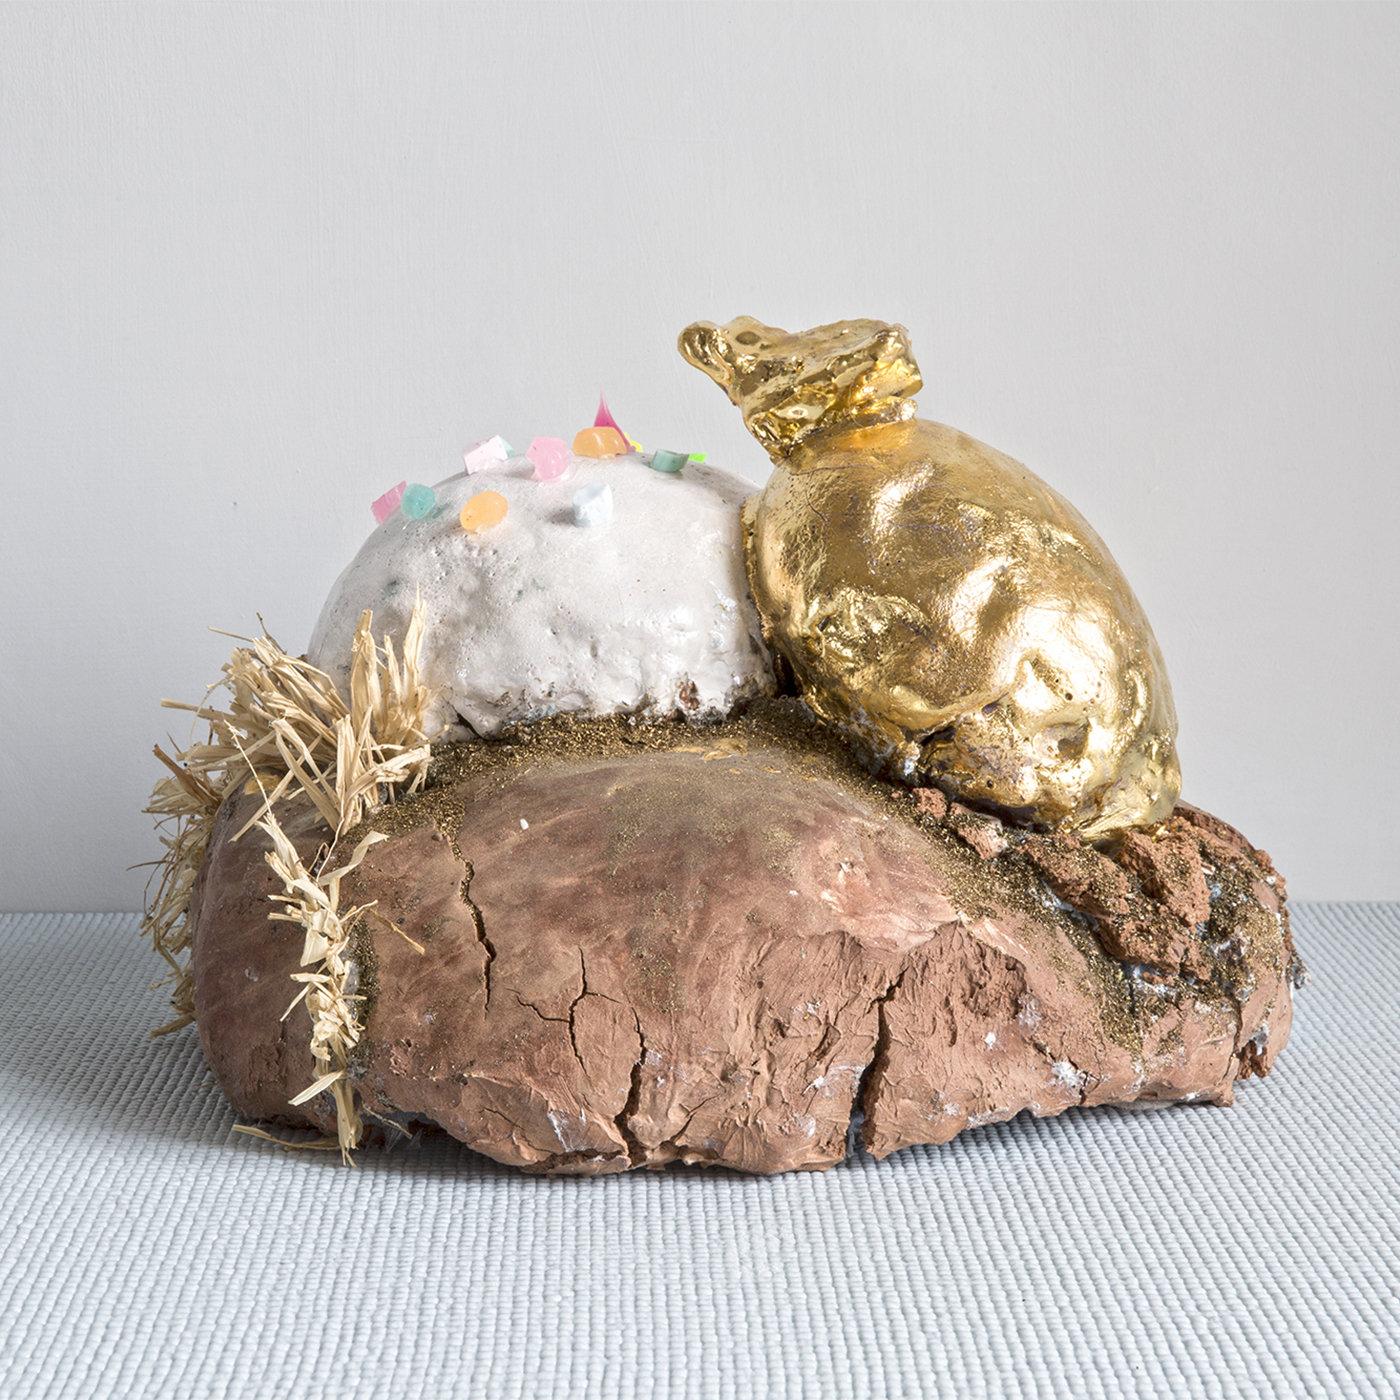 This range of original and artistic pieces is made in total freedom and experimentation, with the addition of silicone, crystals, porcelain animals and some small remnants from production. An unusual centerpiece creates a bond between people, making